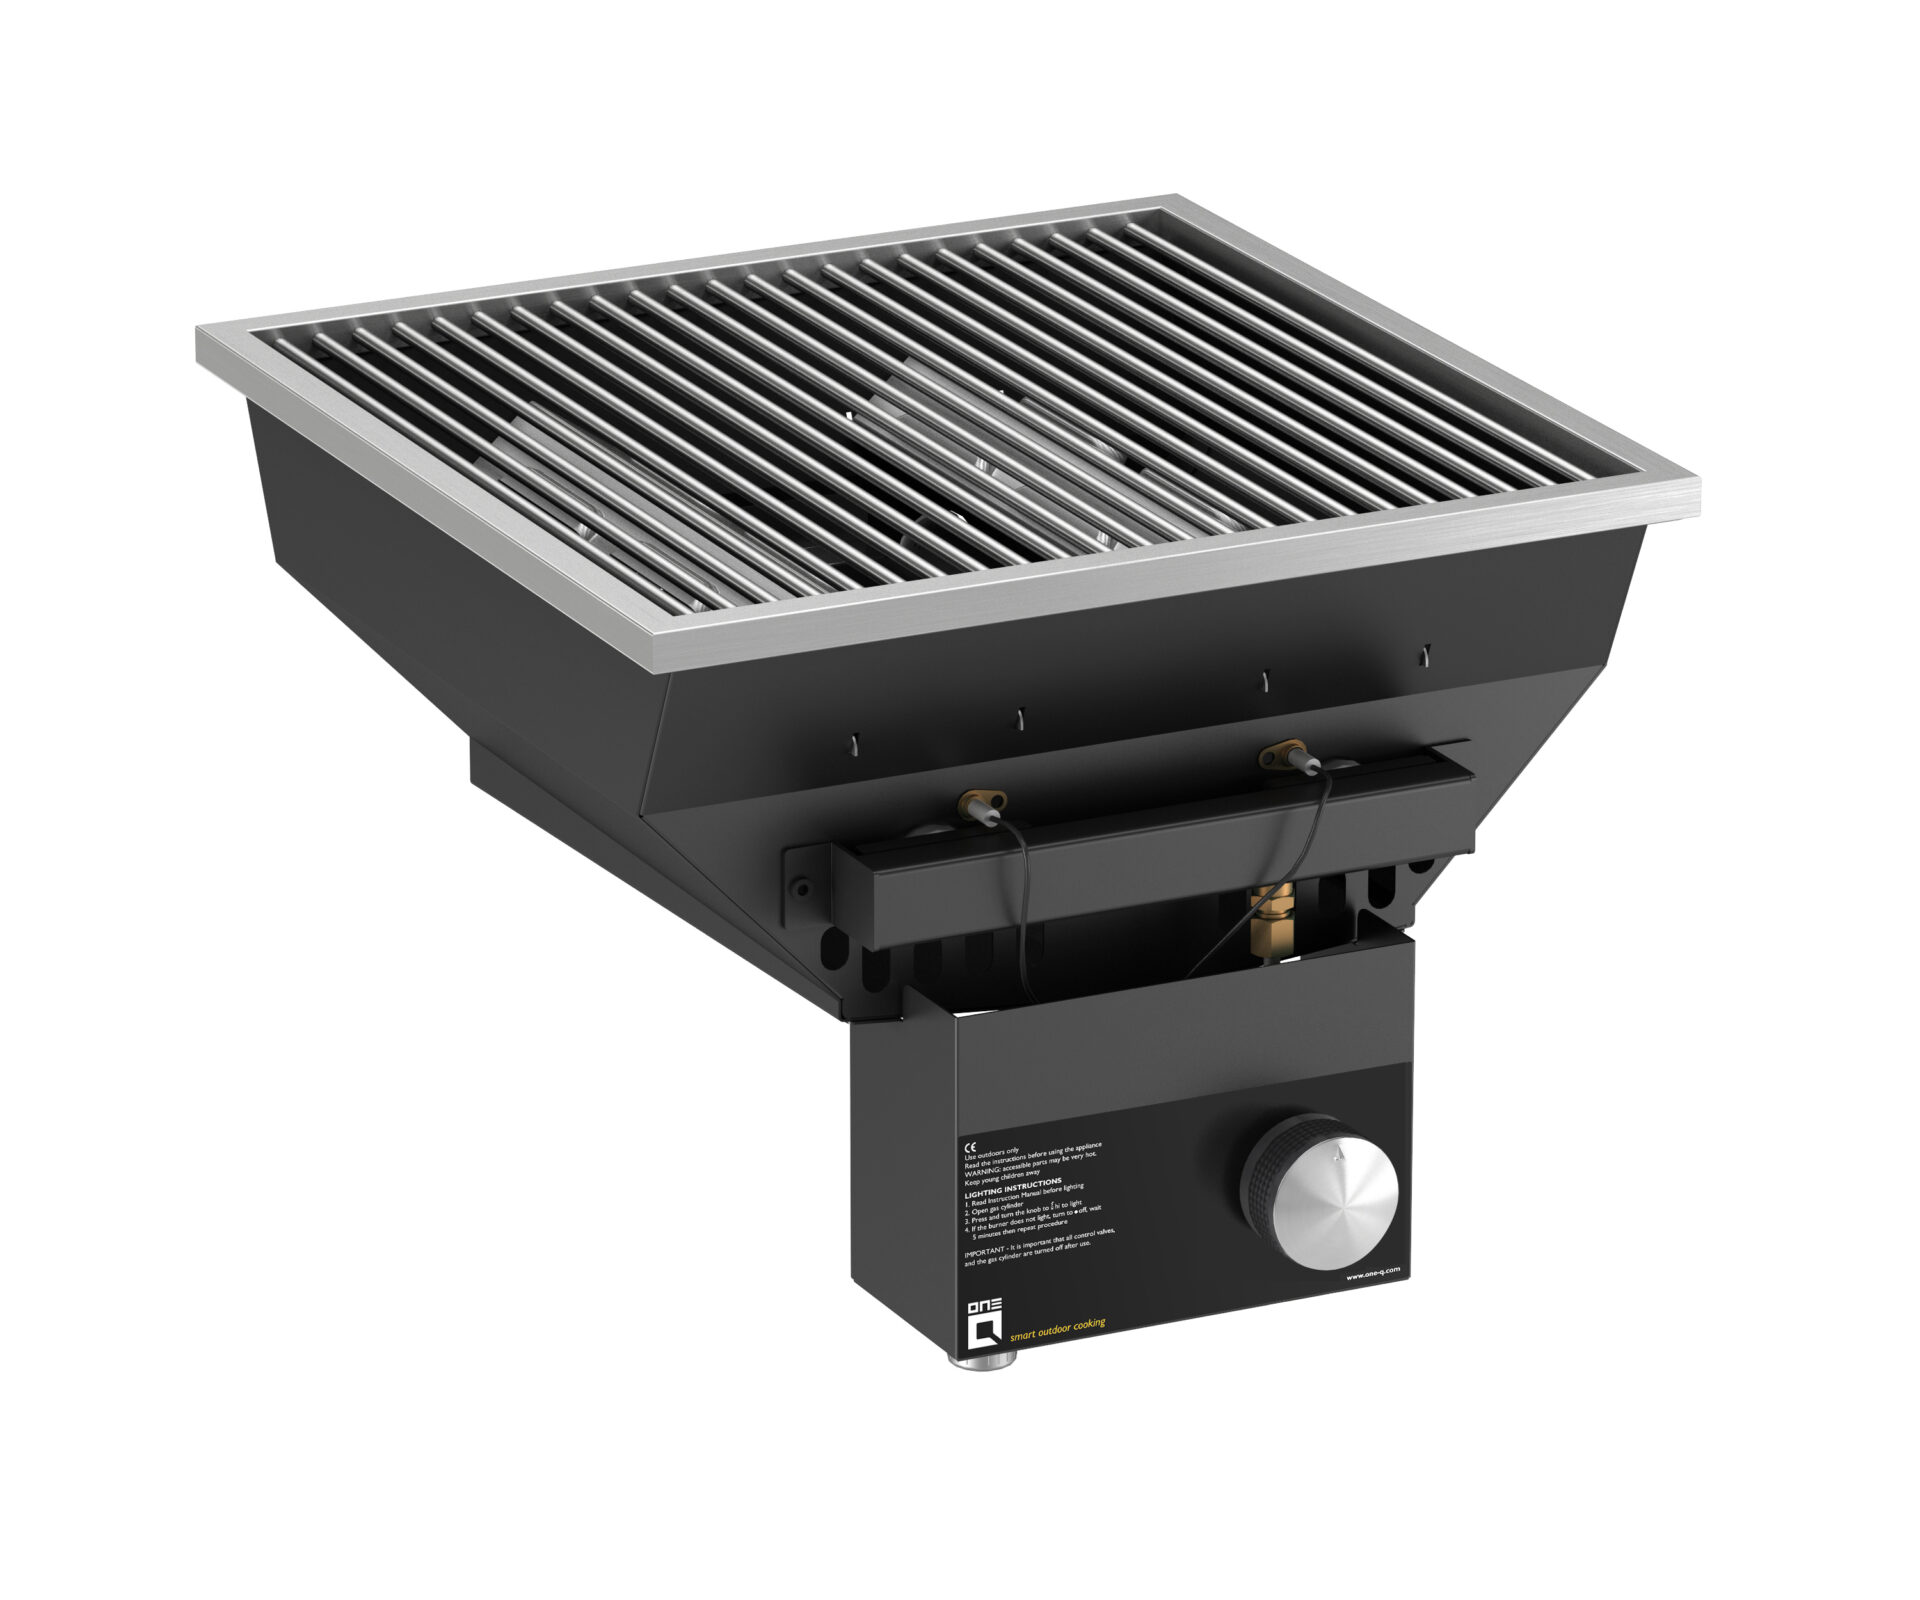 oneQ Flame gas bbq